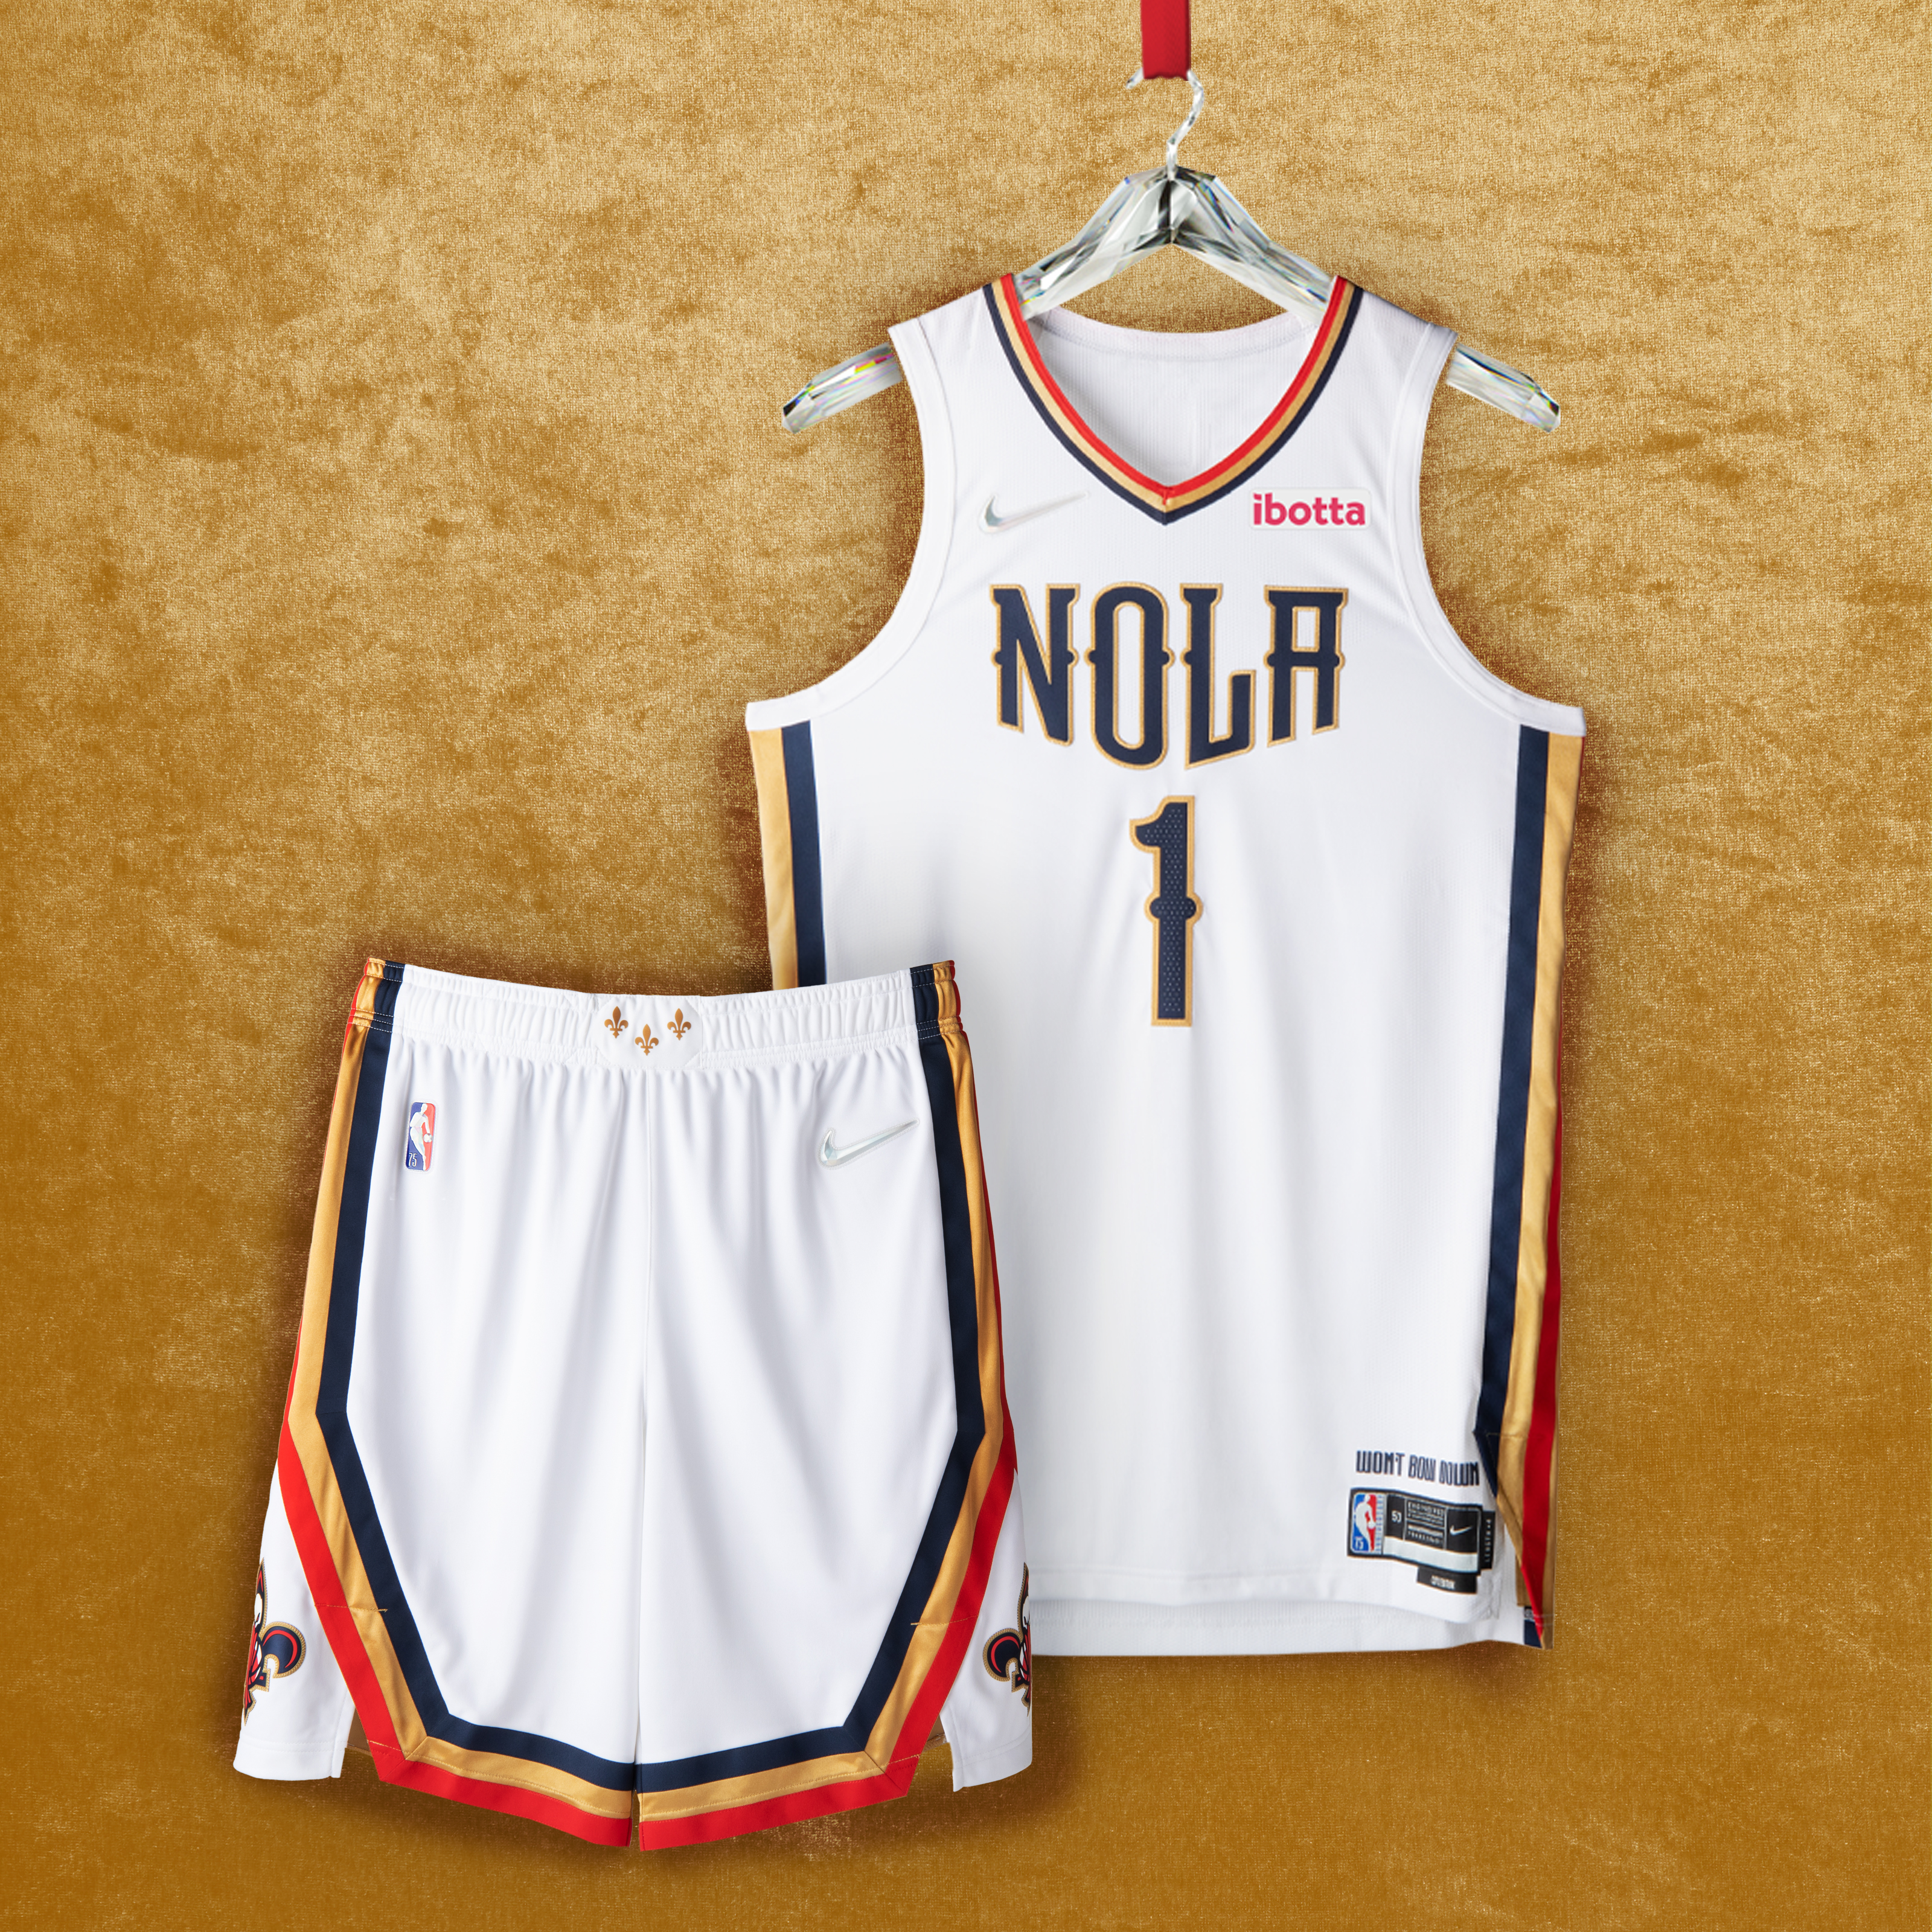 New Orleans Pelicans on X: Our City Edition jersey schedule